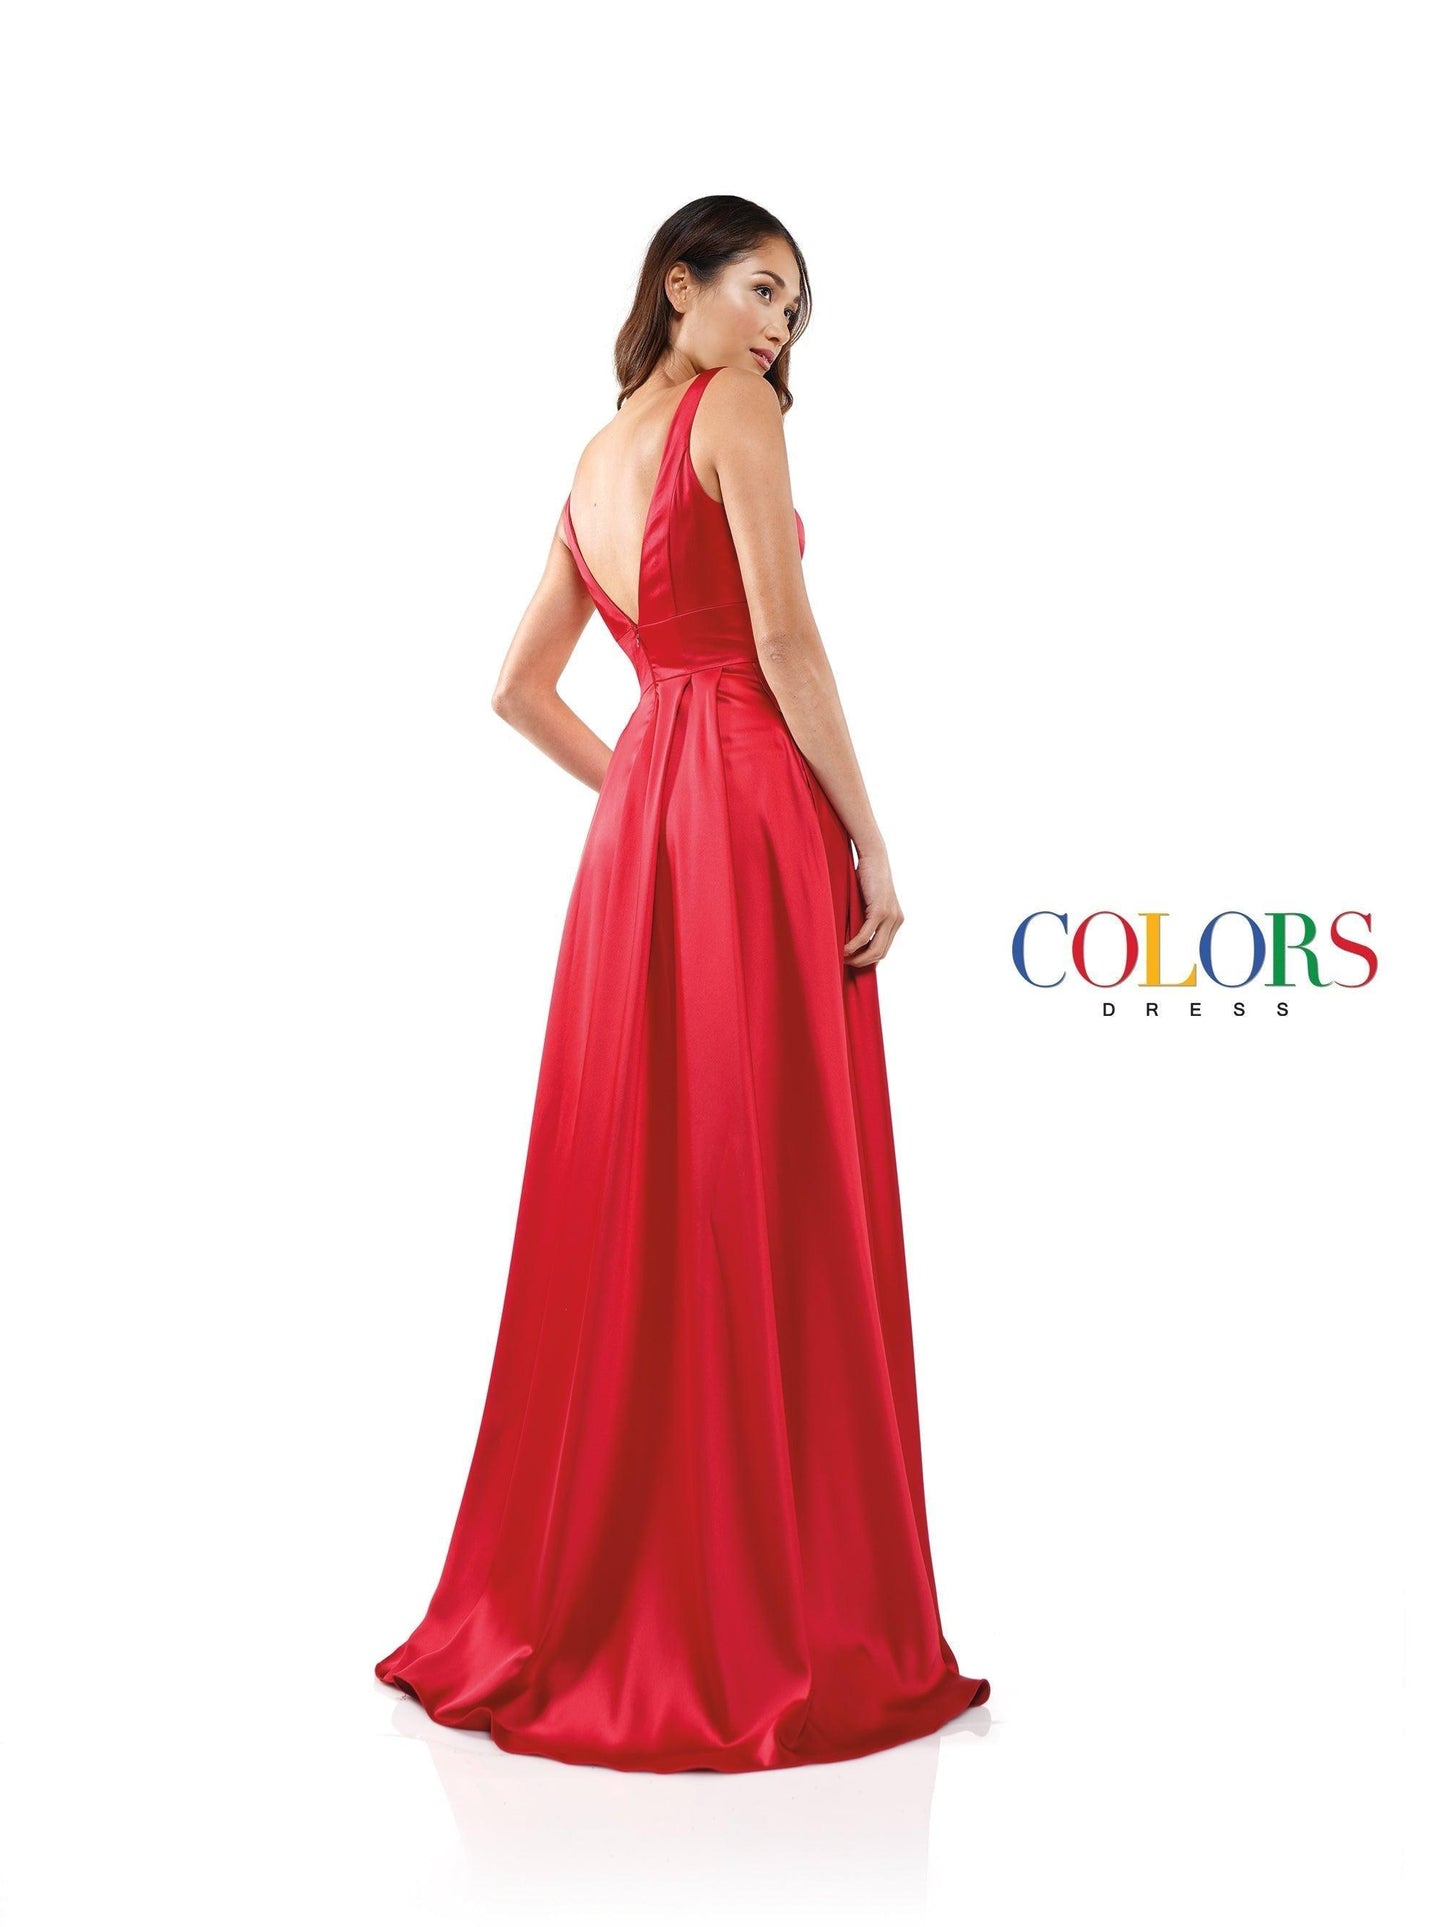 Colors Long Sleeveless Formal Prom Dress 904 - The Dress Outlet